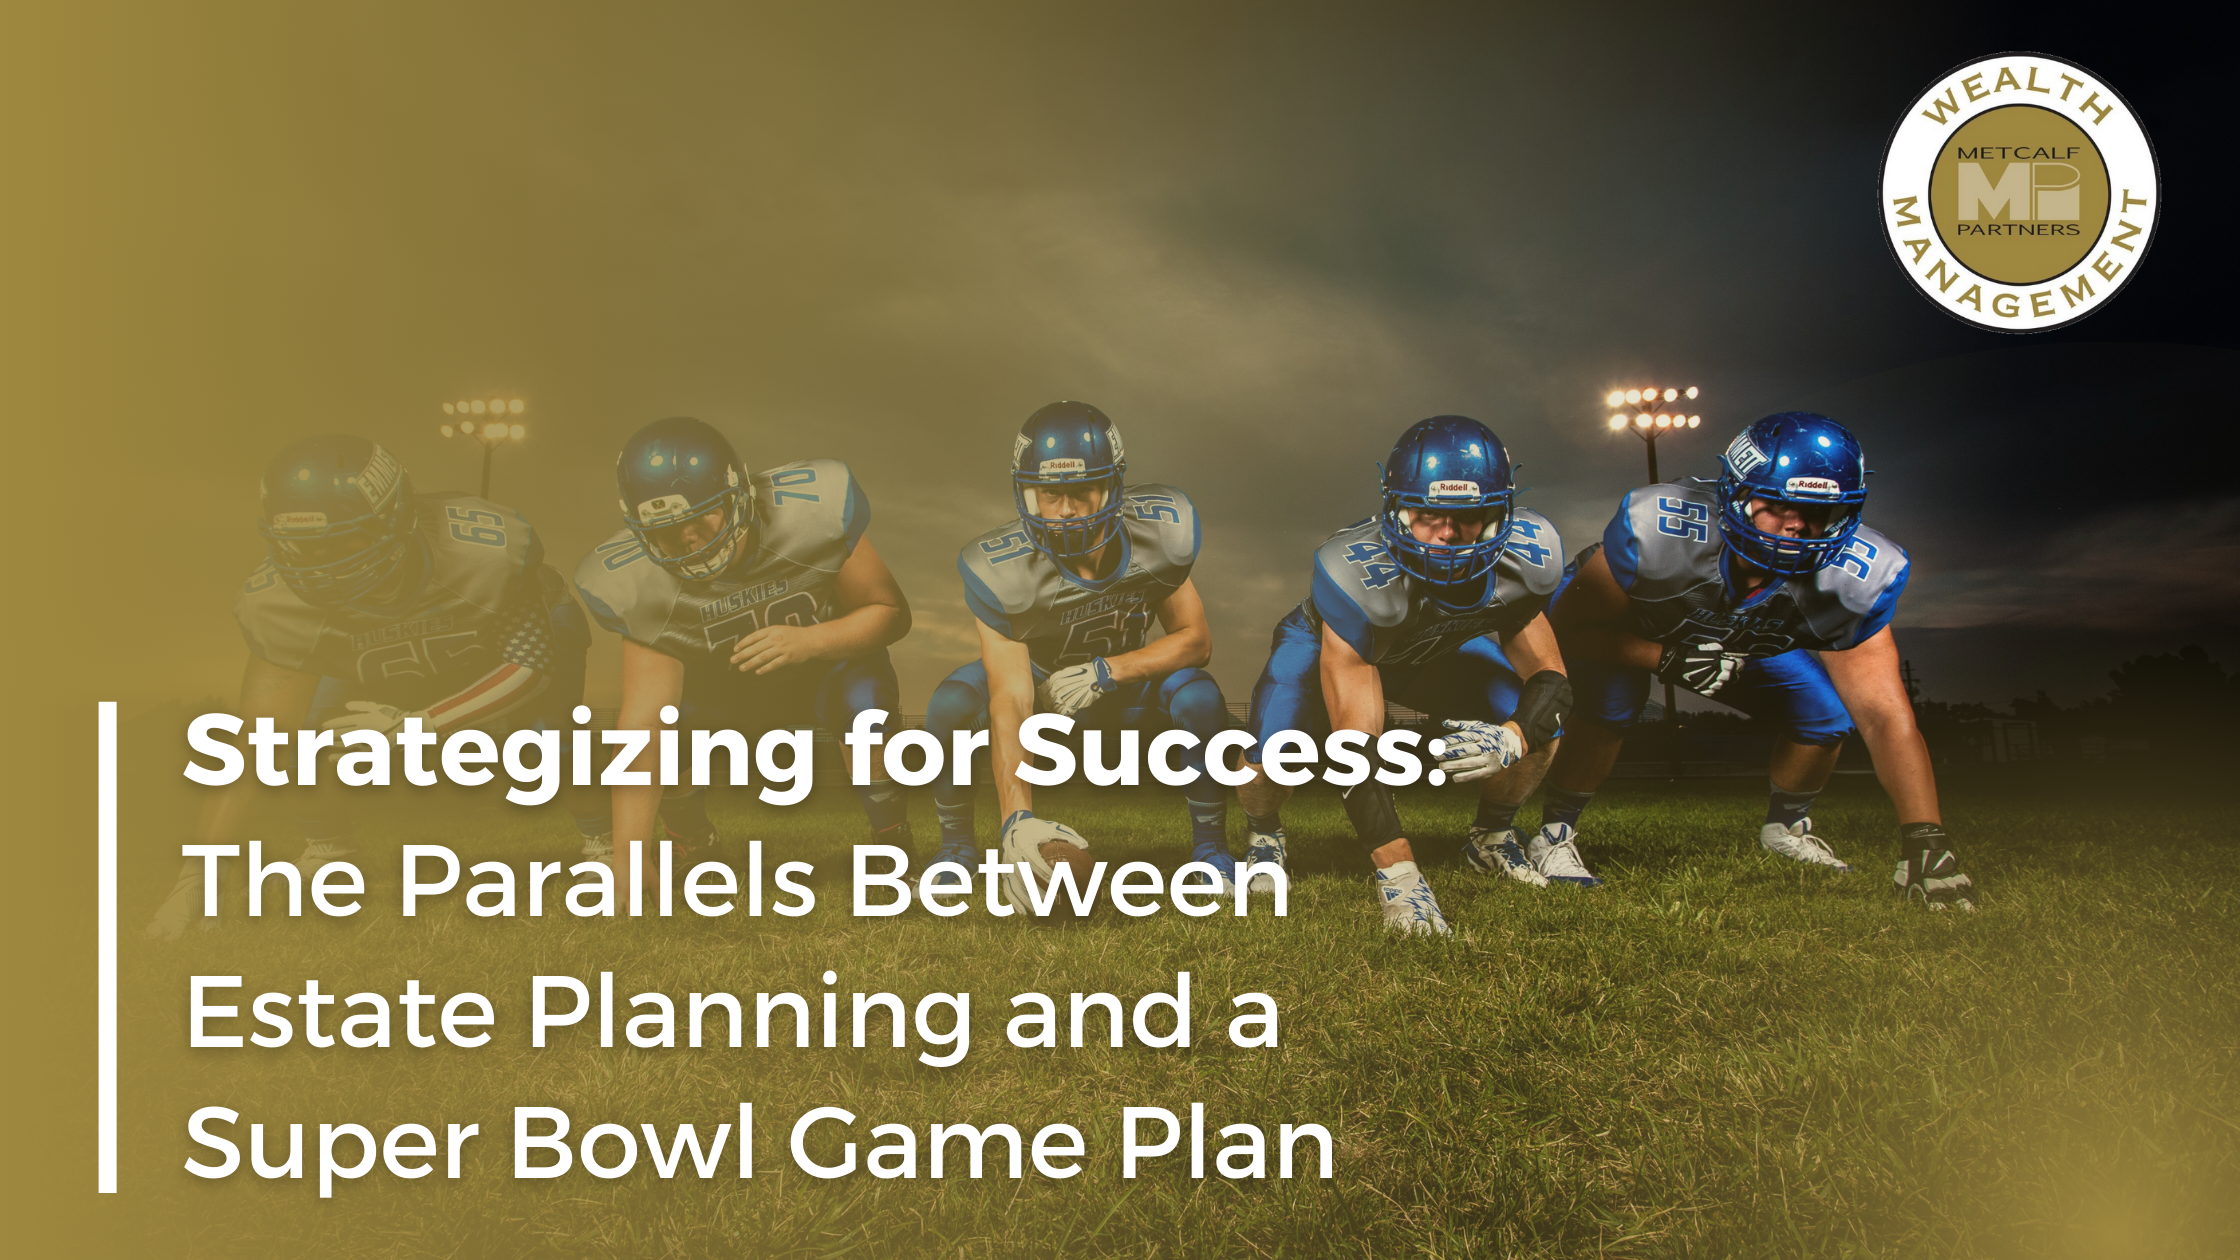 Featured image for “Strategizing for Success: The Parallels Between Estate Planning and a Super Bowl Game Plan”